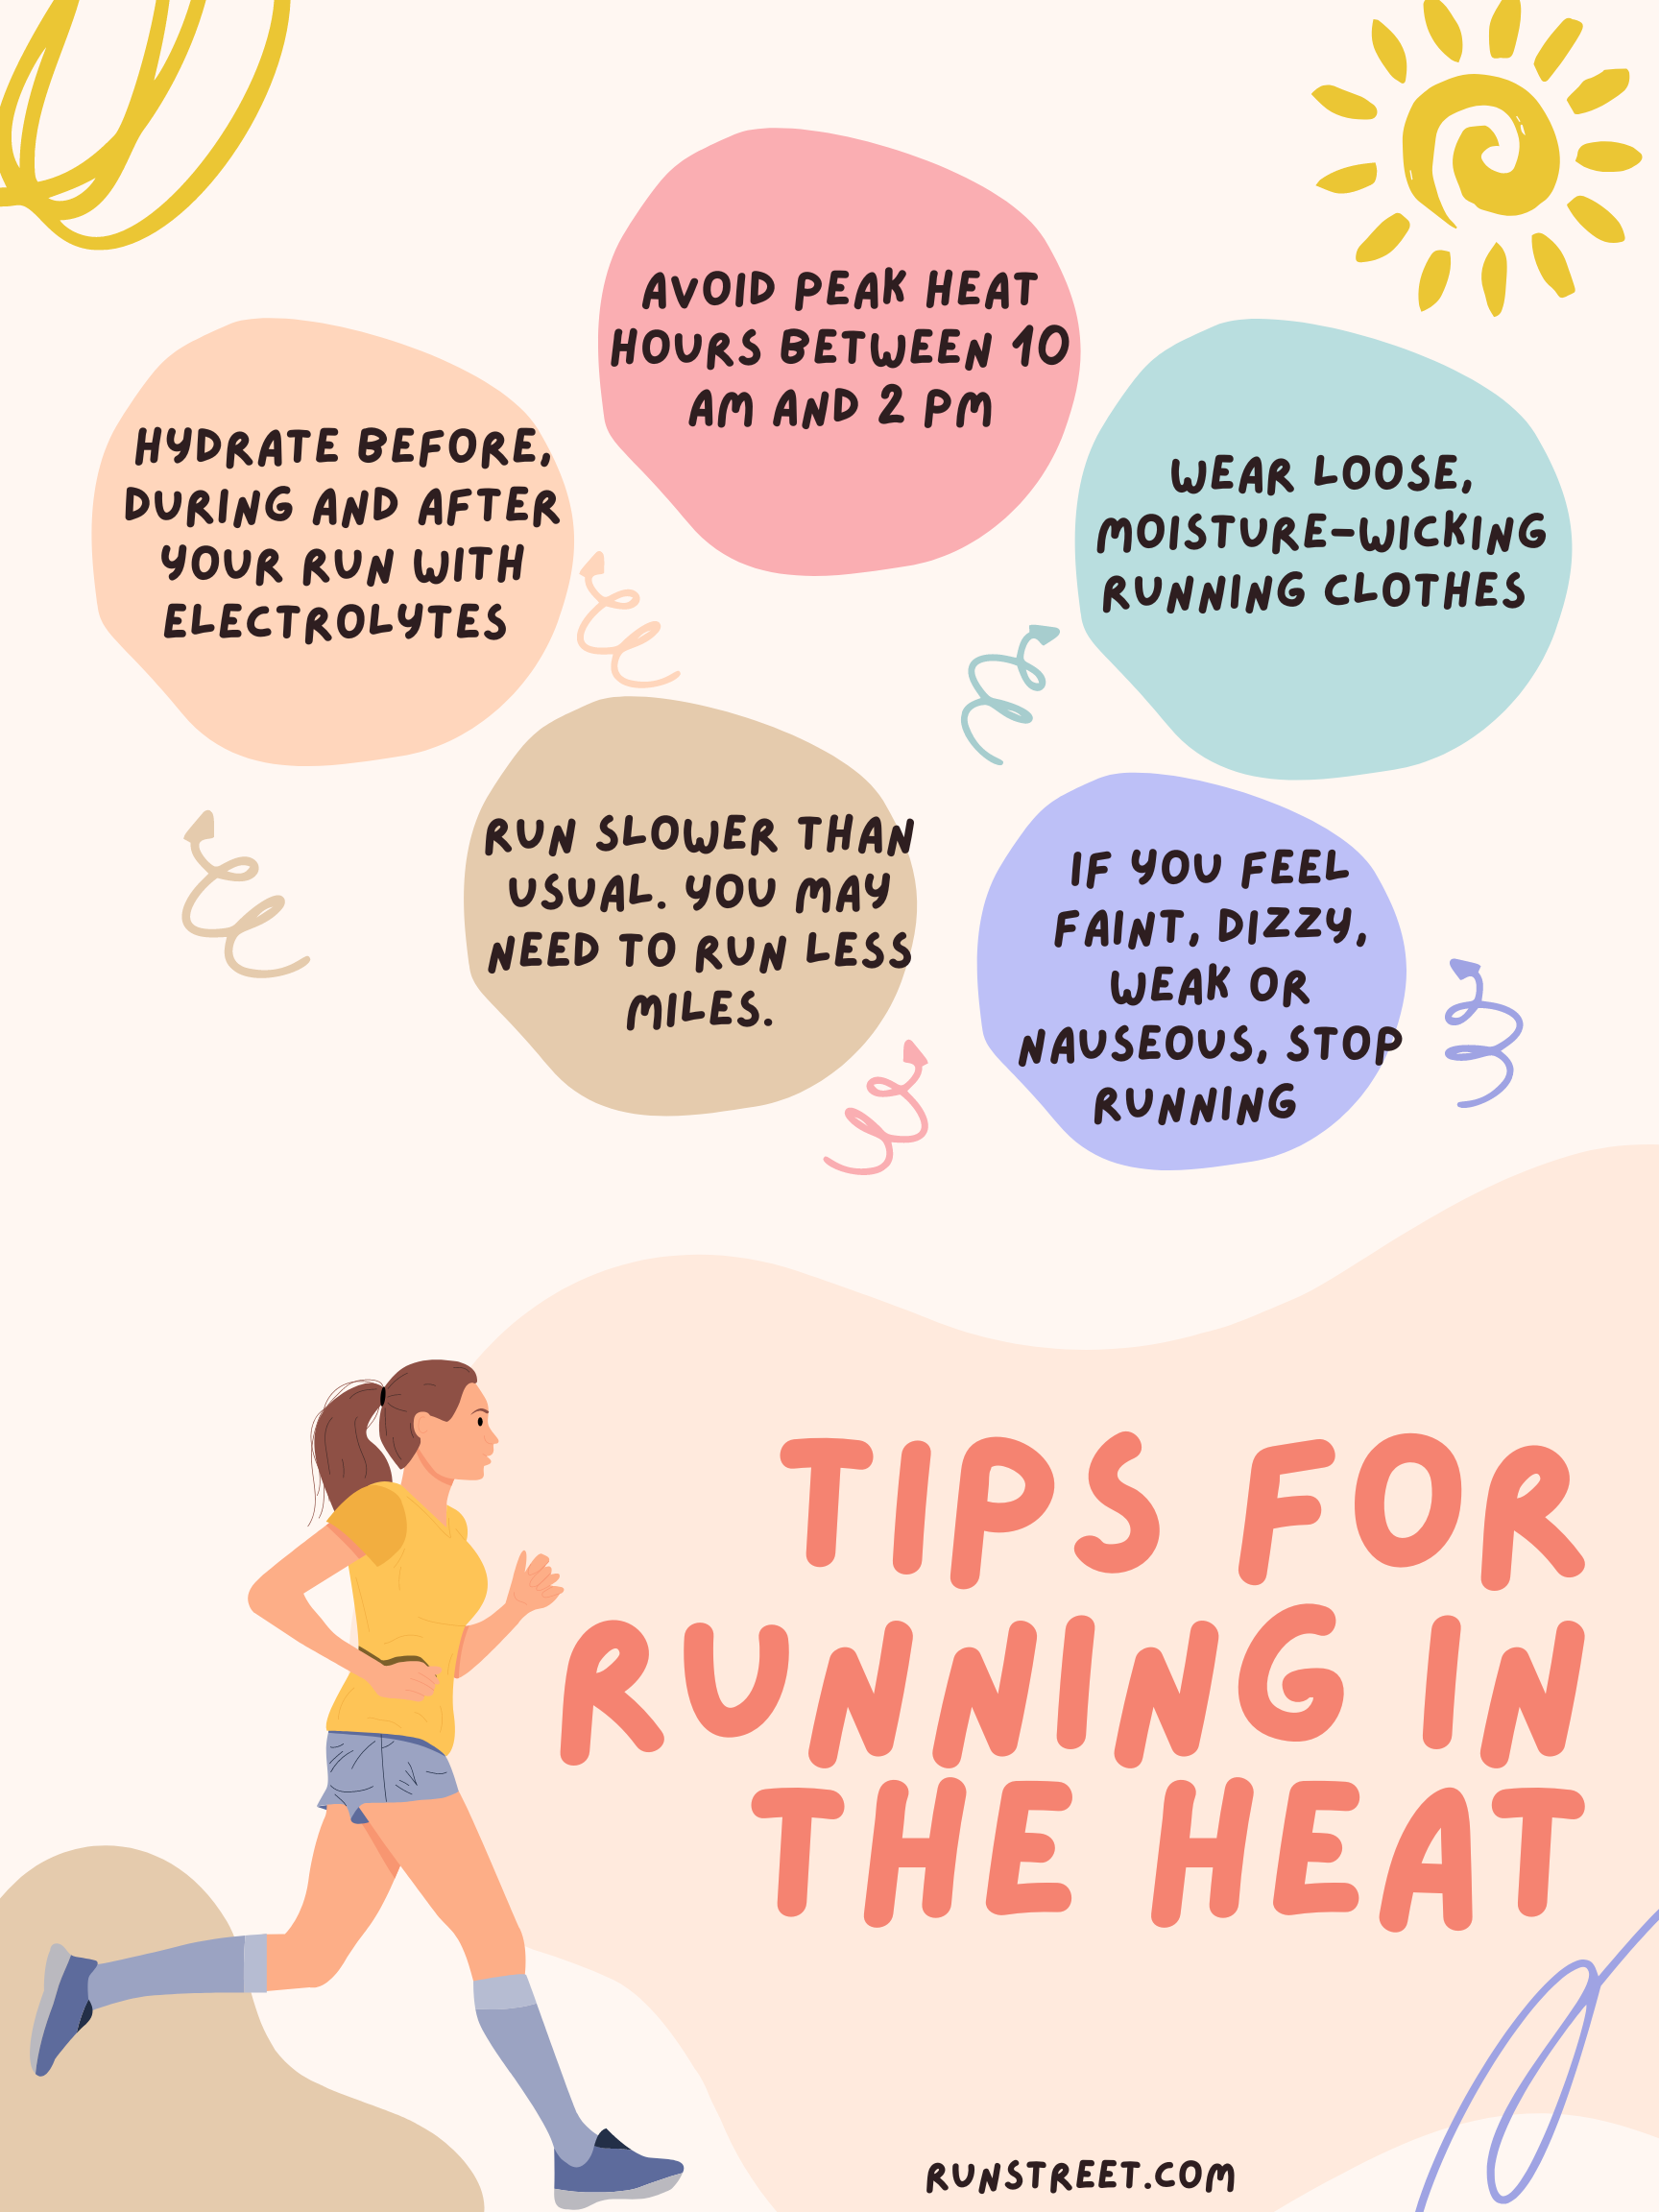 II. Benefits of Proper Hydration for Runners